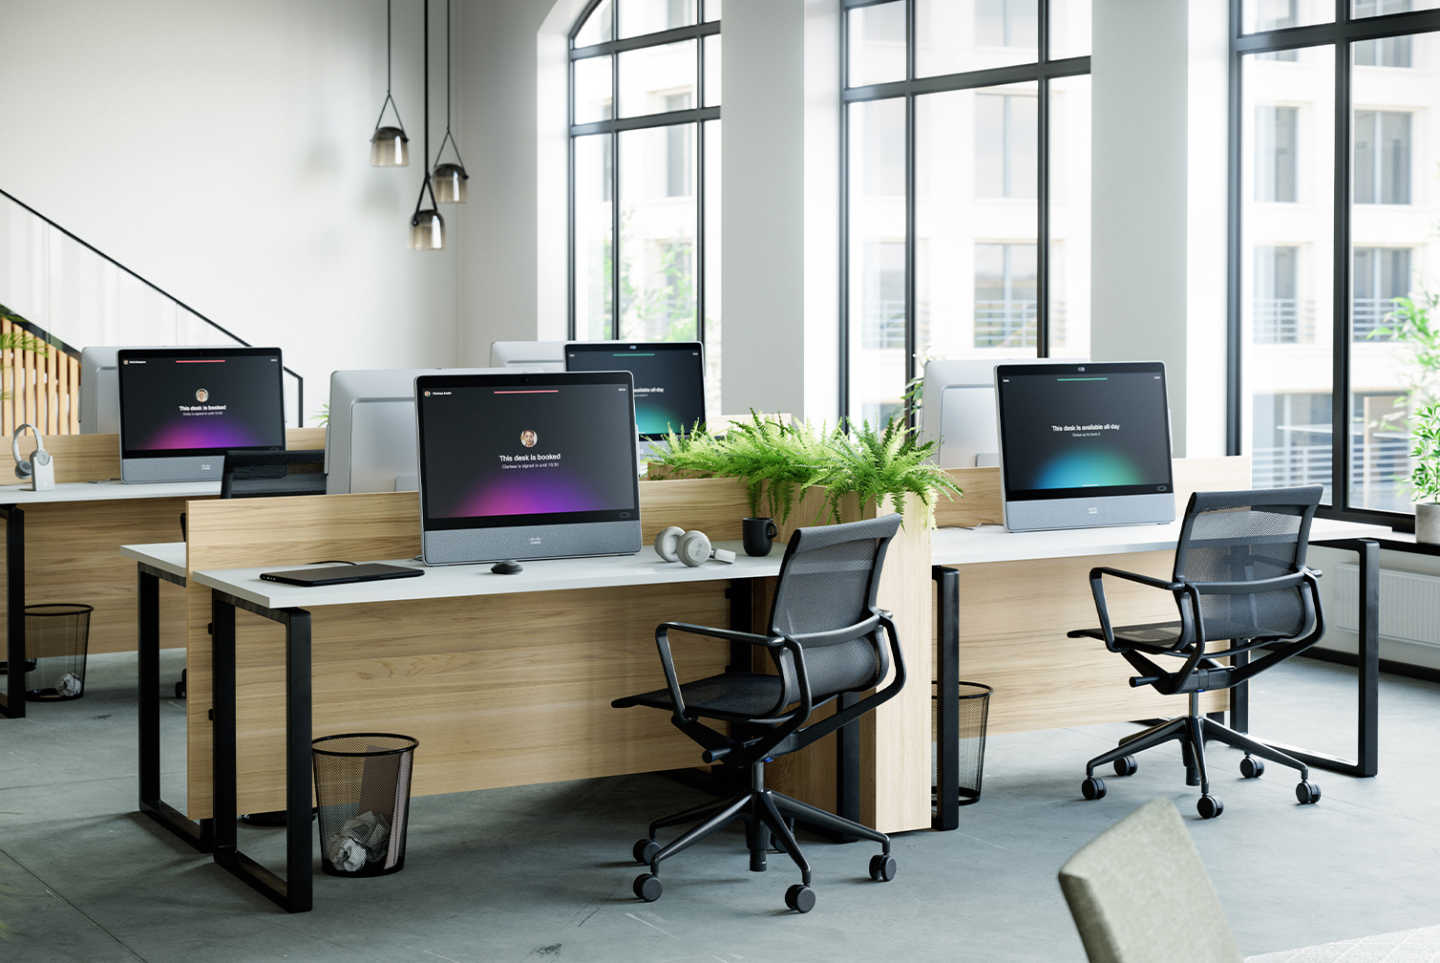 Personalized hot desking at your fingertips